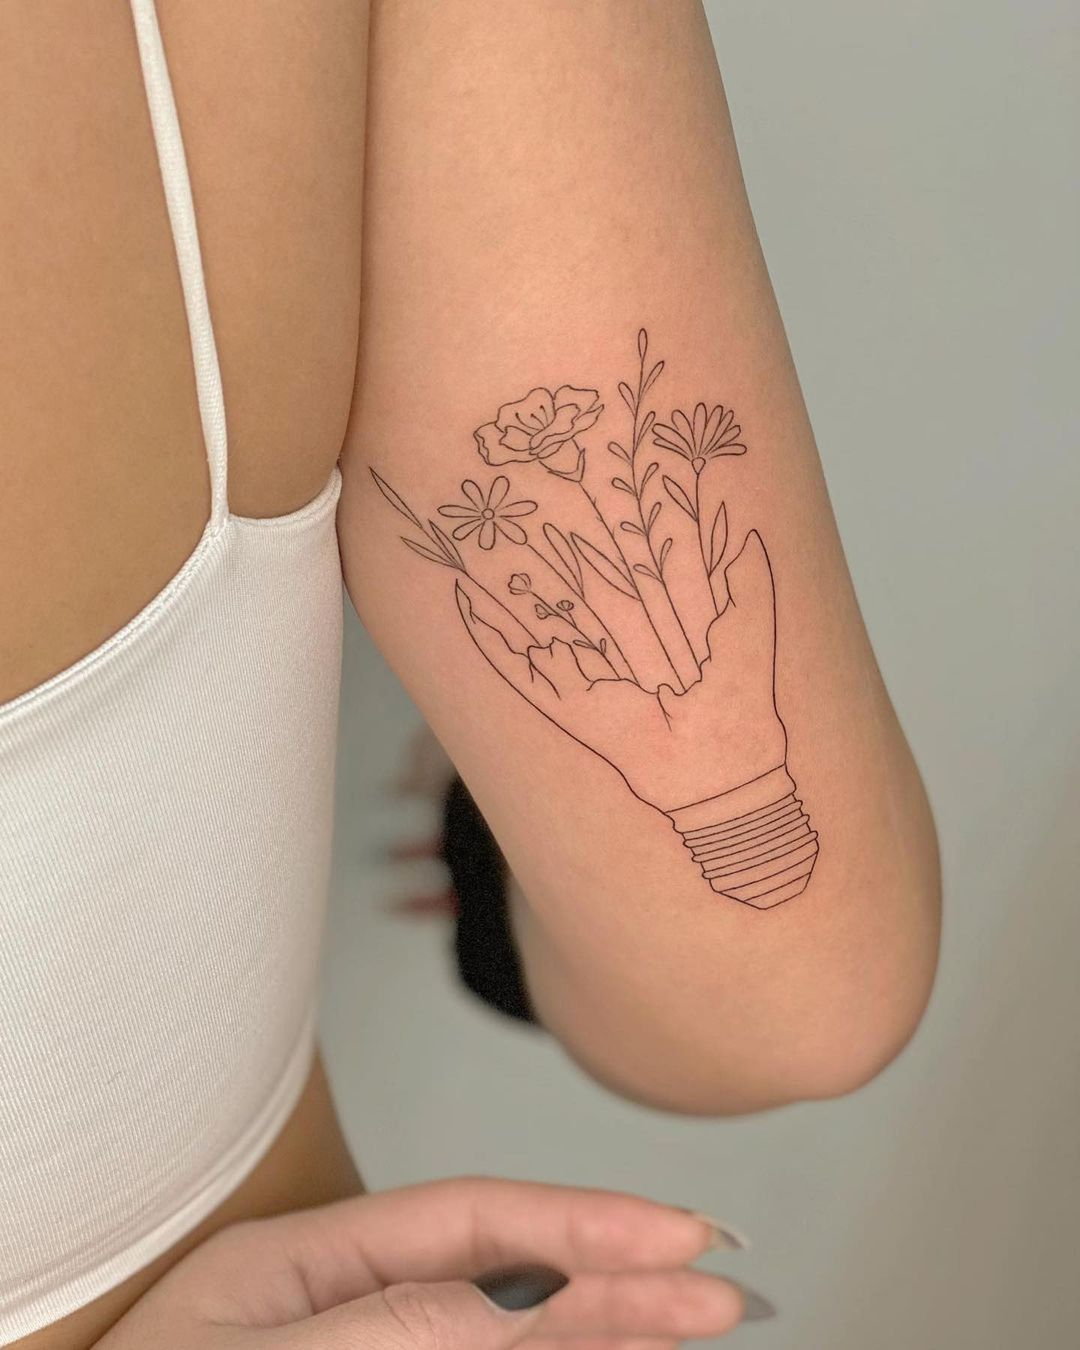 Where to Get Matching Tattoos in New York